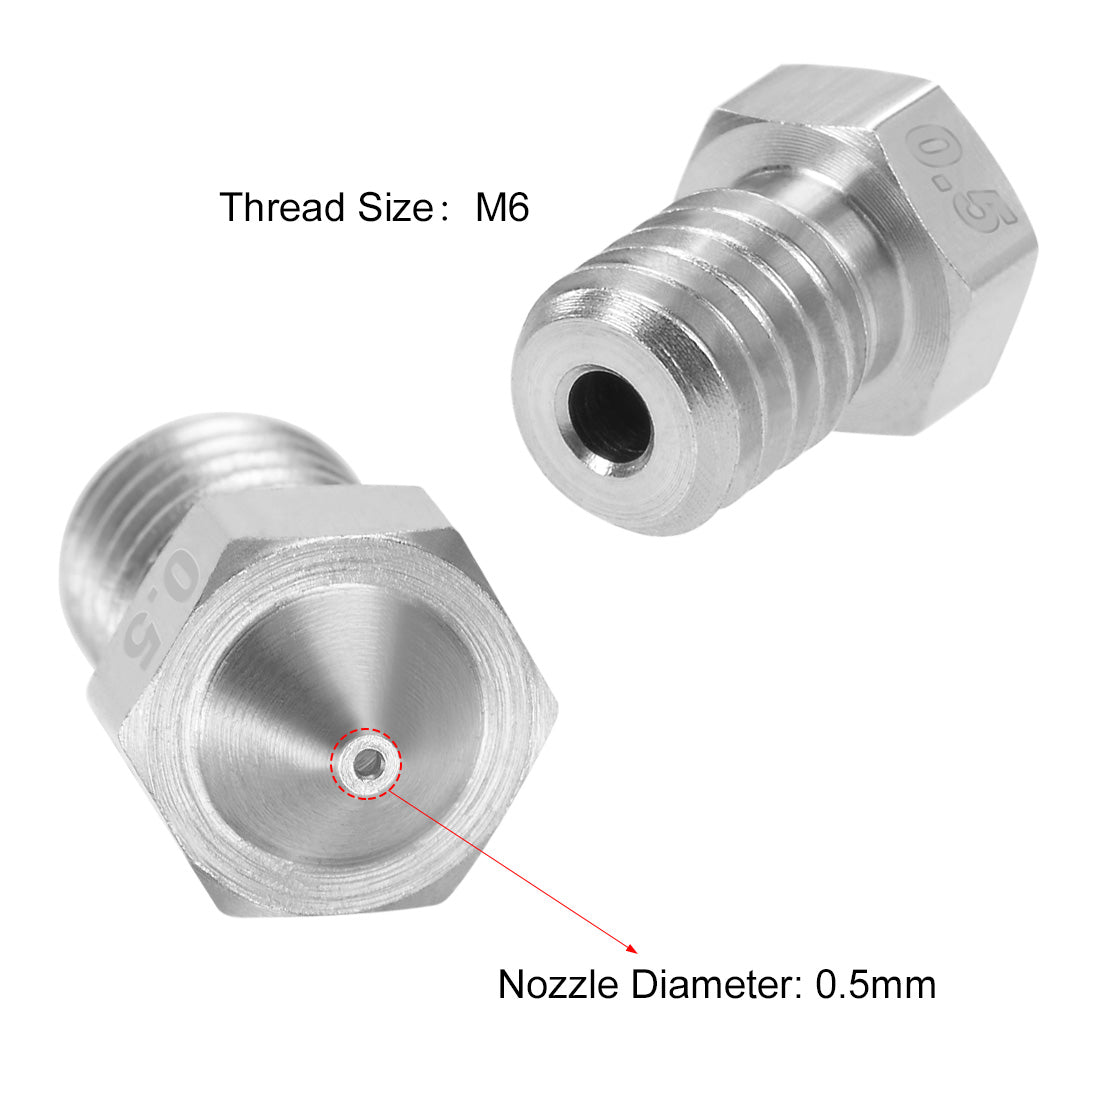 uxcell Uxcell 0.5mm 3D Printer Nozzle Head M6 Thread Replacement for V5 V6 1.75mm Extruder Print, Stainless Steel 4pcs